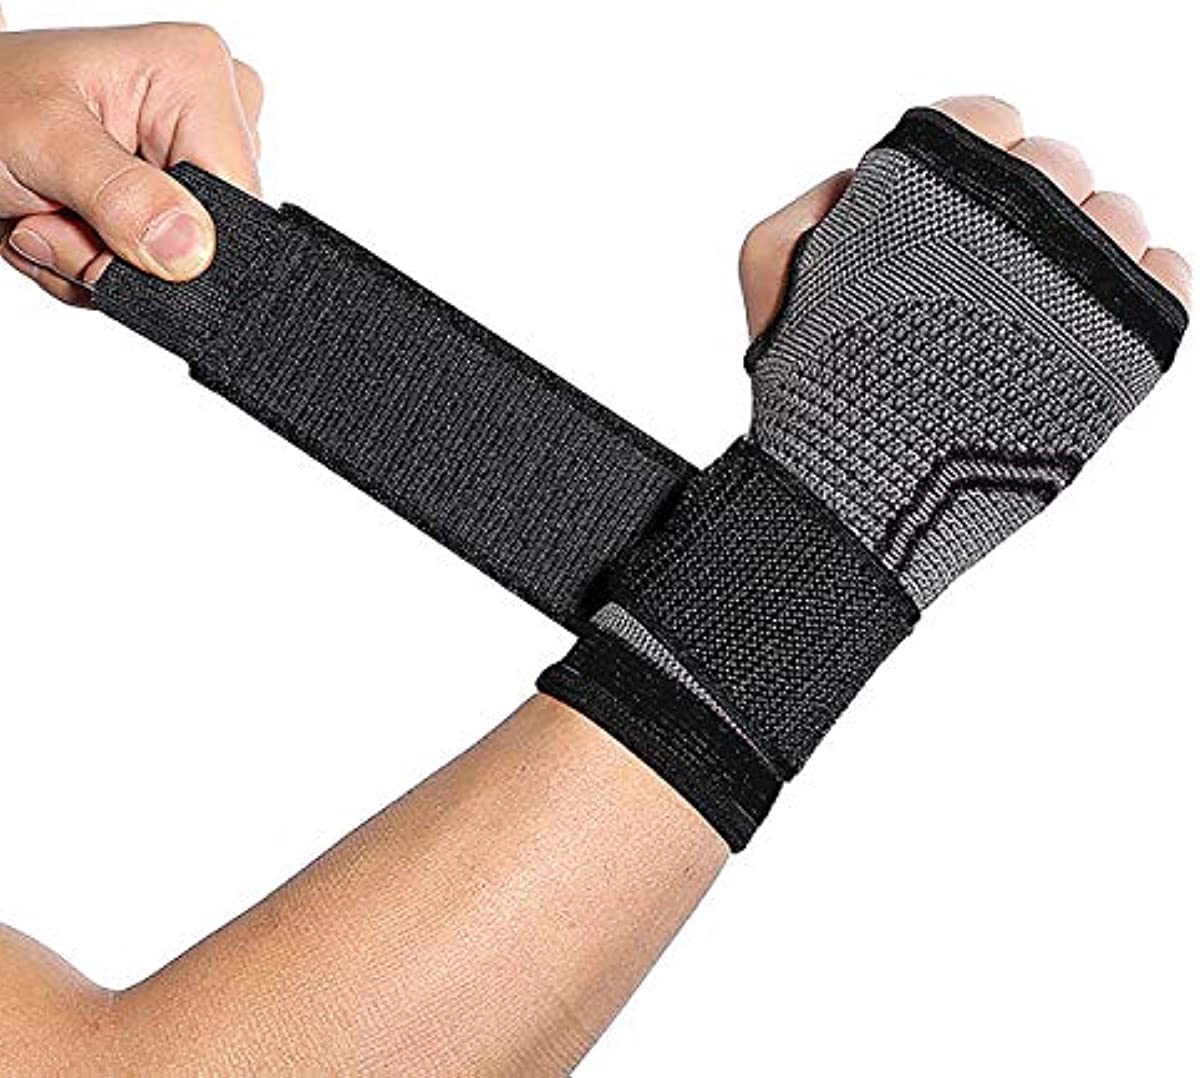 HiRui 2-Pack Wrist Brace Wrist Wrap, Wrist Strap Hand Compression Sleeves Support for Fitness Weightlifting MTB Tendonitis Sprains Recovery, Carpal Tunnel Arthritis, Pain Relief (Black, Small)